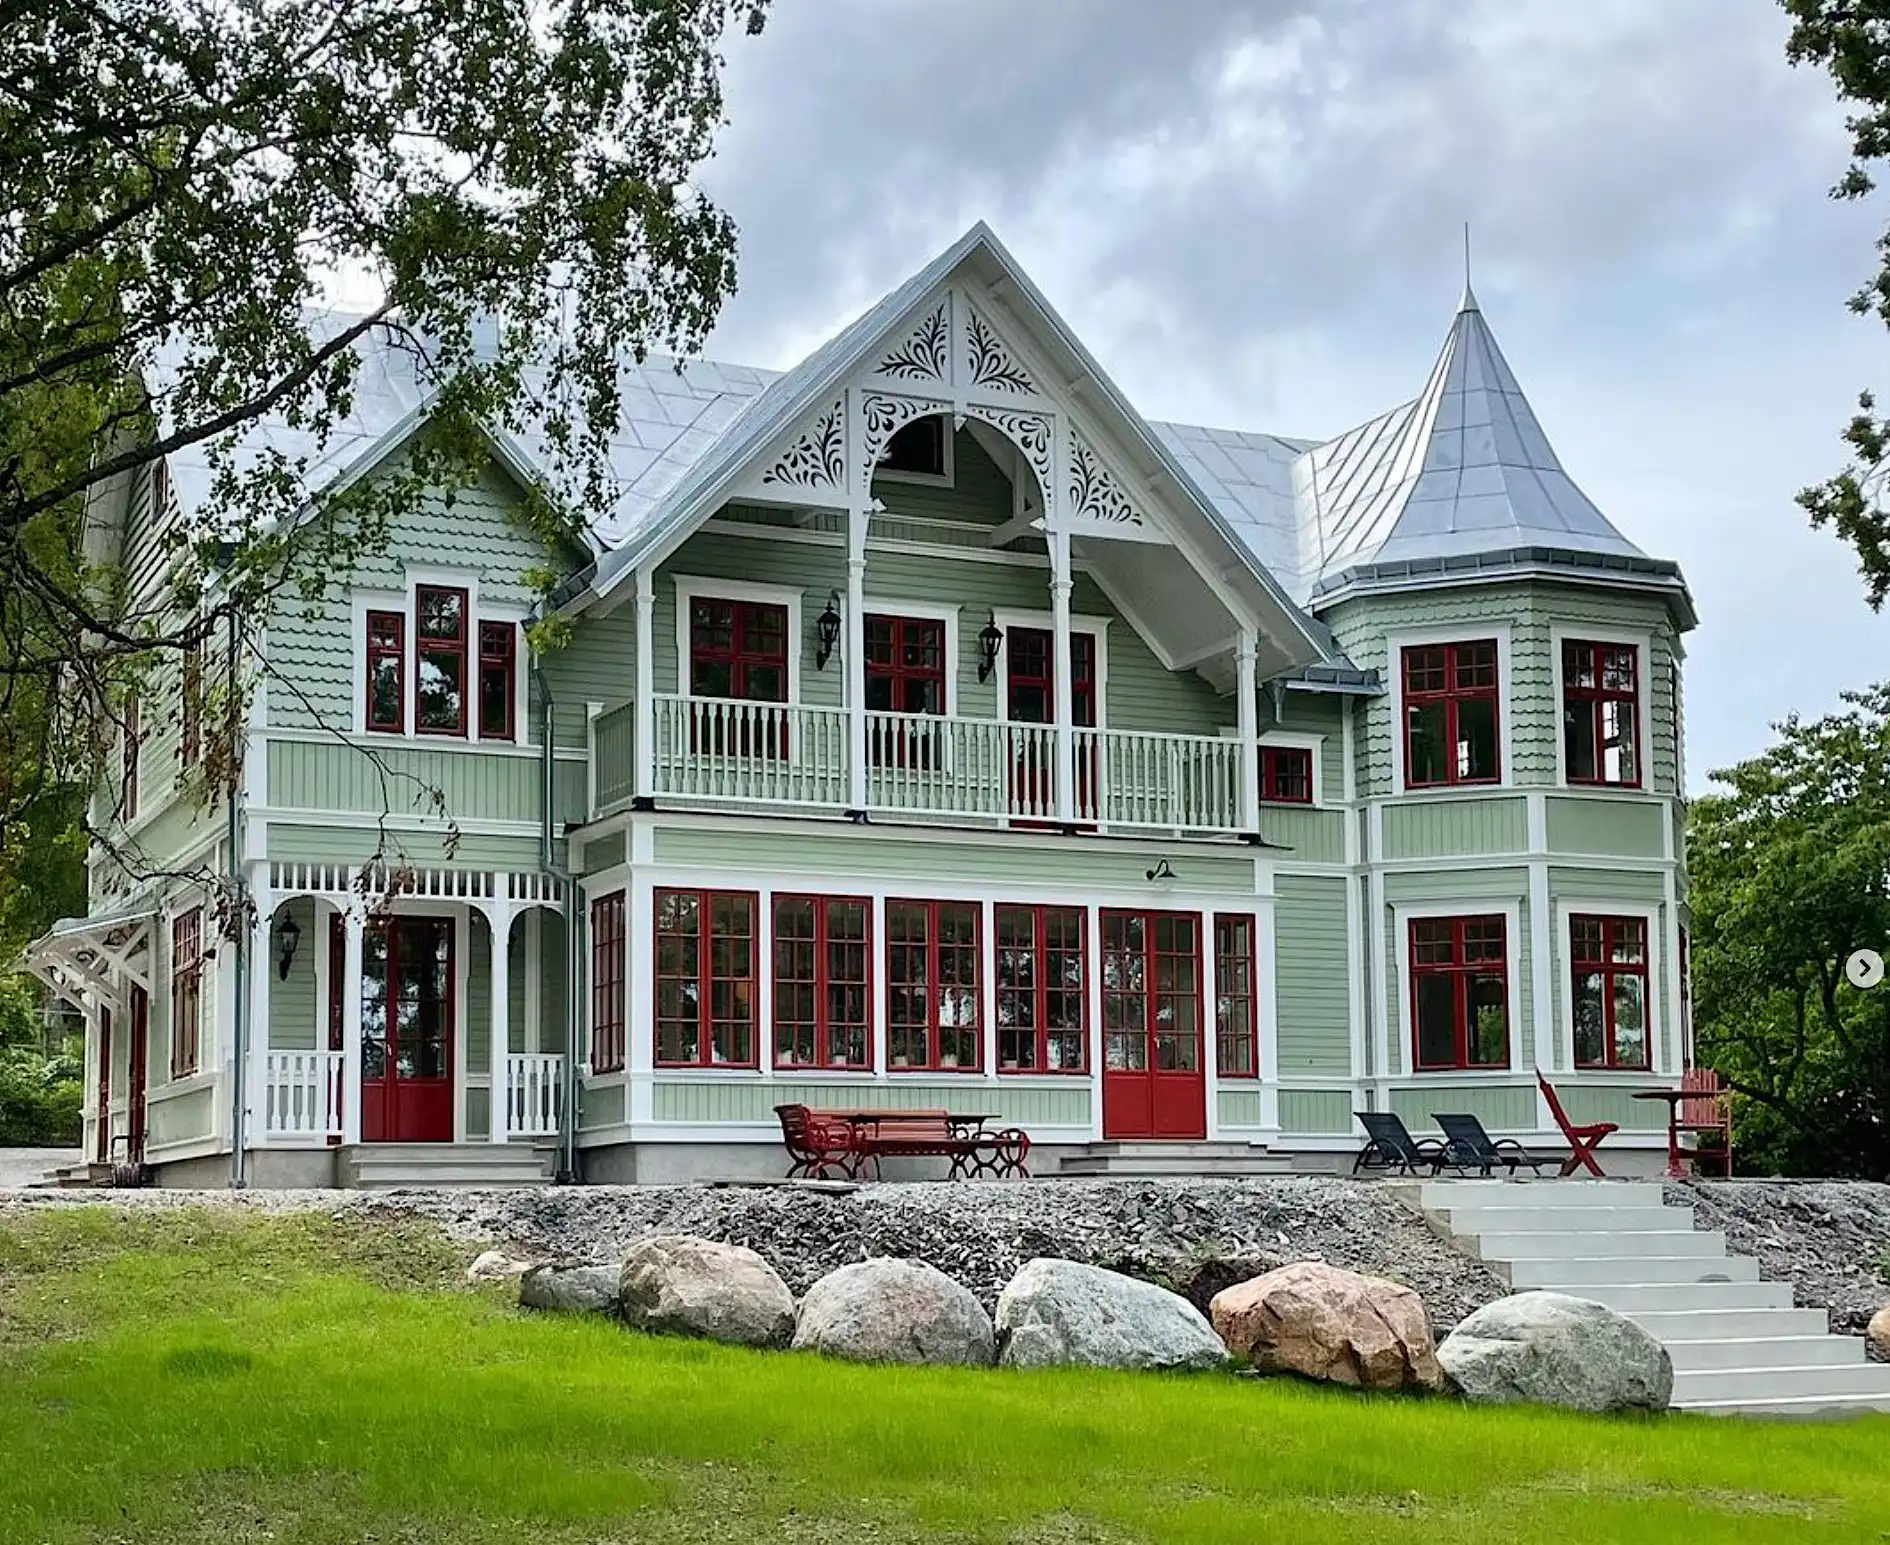 A typical Swedish Victorian green house with a porch and a lot of trim and moulding - wooden brackets - Red windows inspired by the turn of the century and 19th-century Jugendstil - Gaveldekor